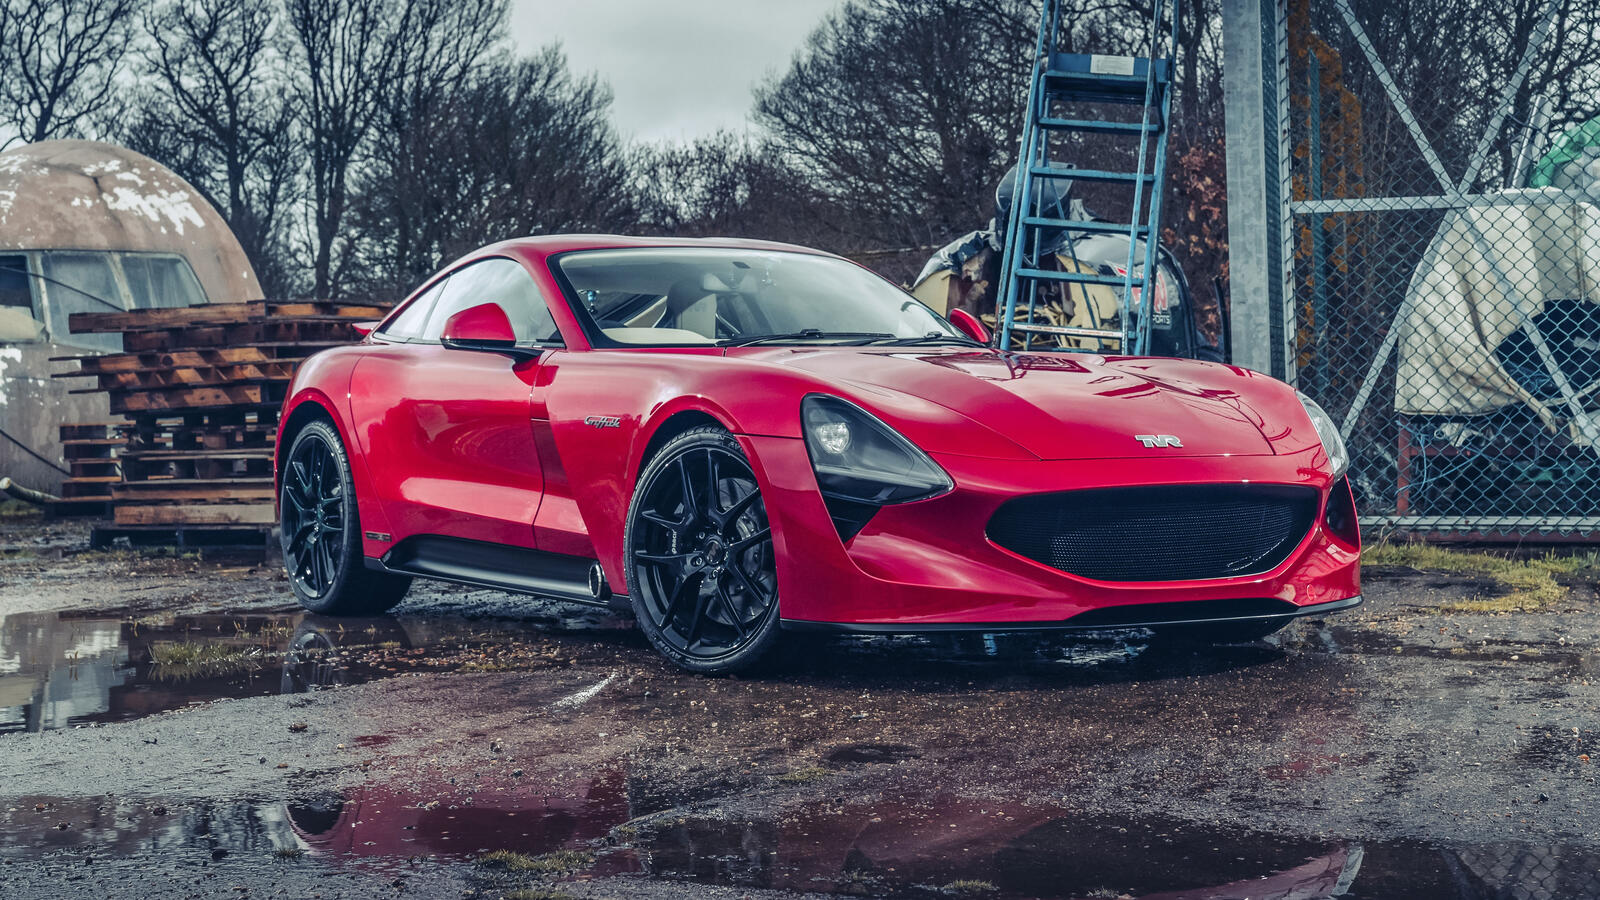 Free photo Tvr griffith in red